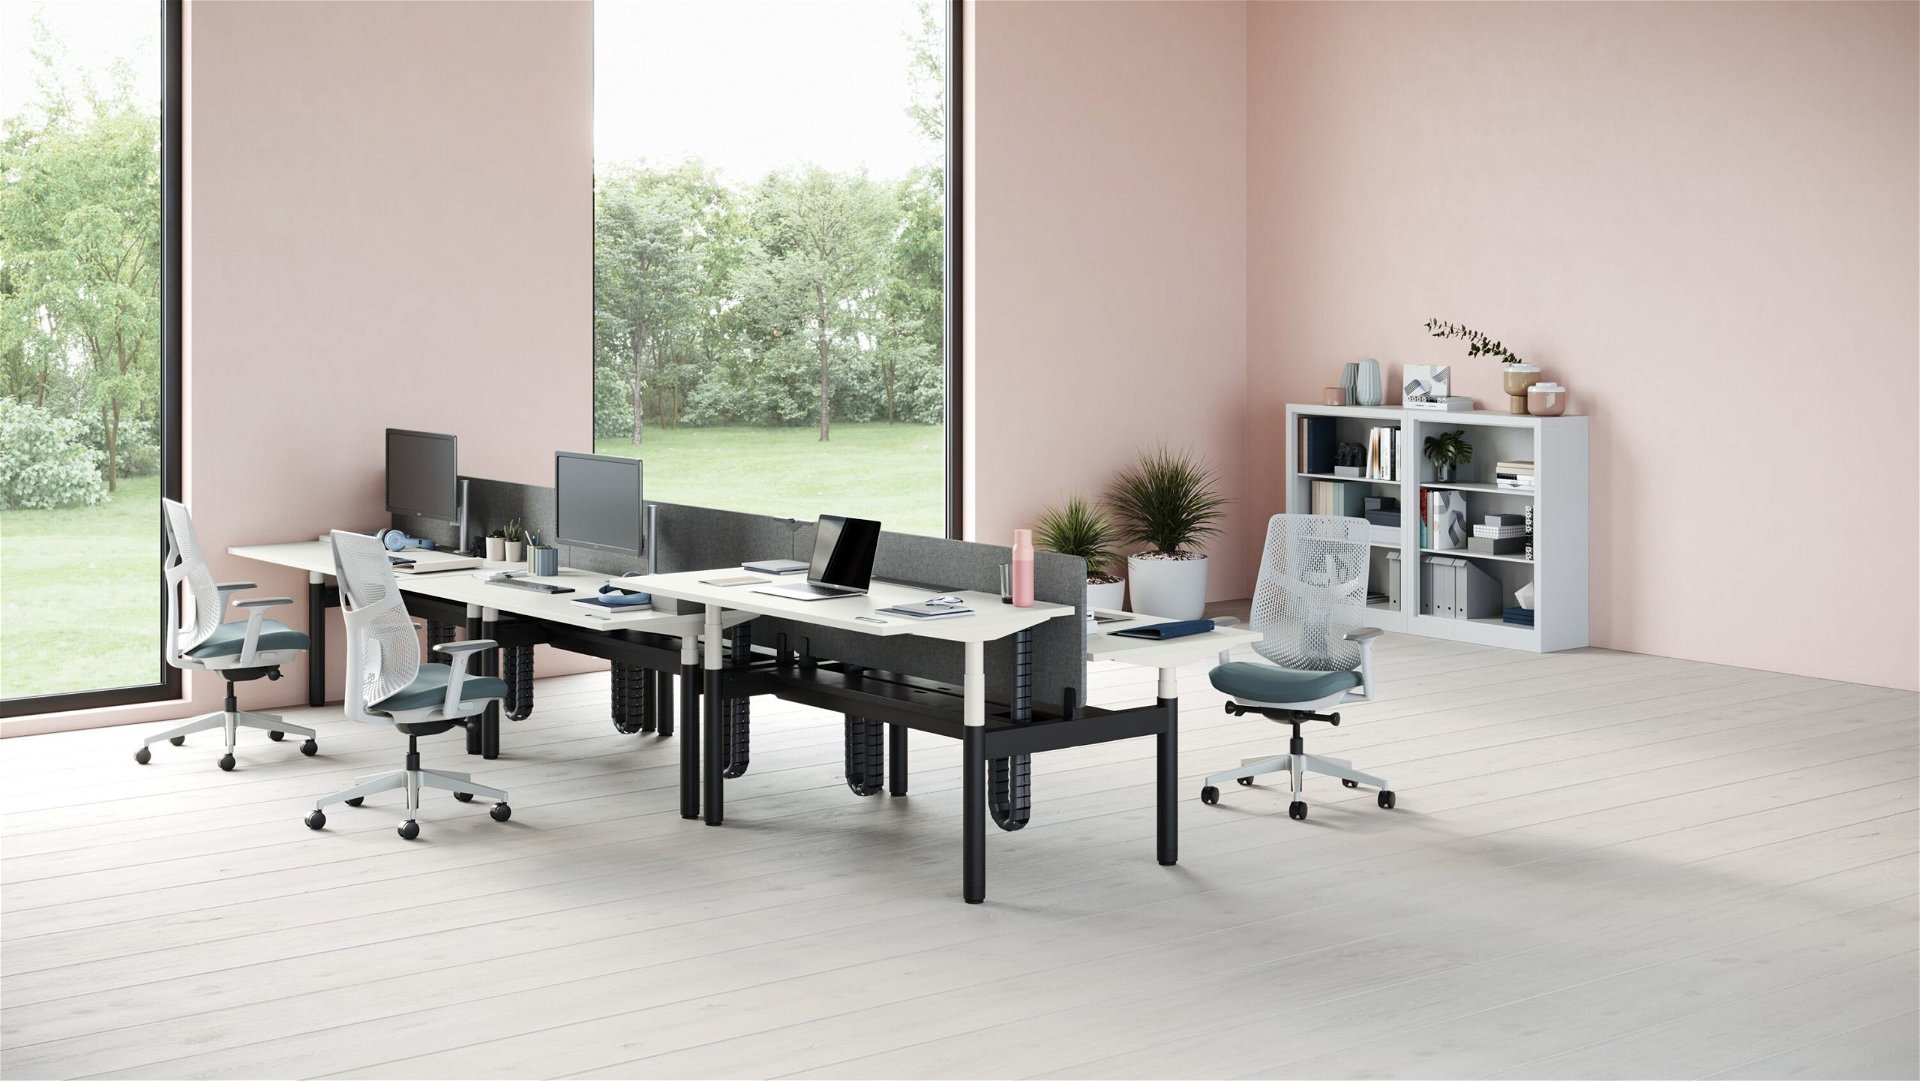 Syge person Hassy Stat Herman Miller's Sit-to-Stand Desking Solution Ratio Undergoes